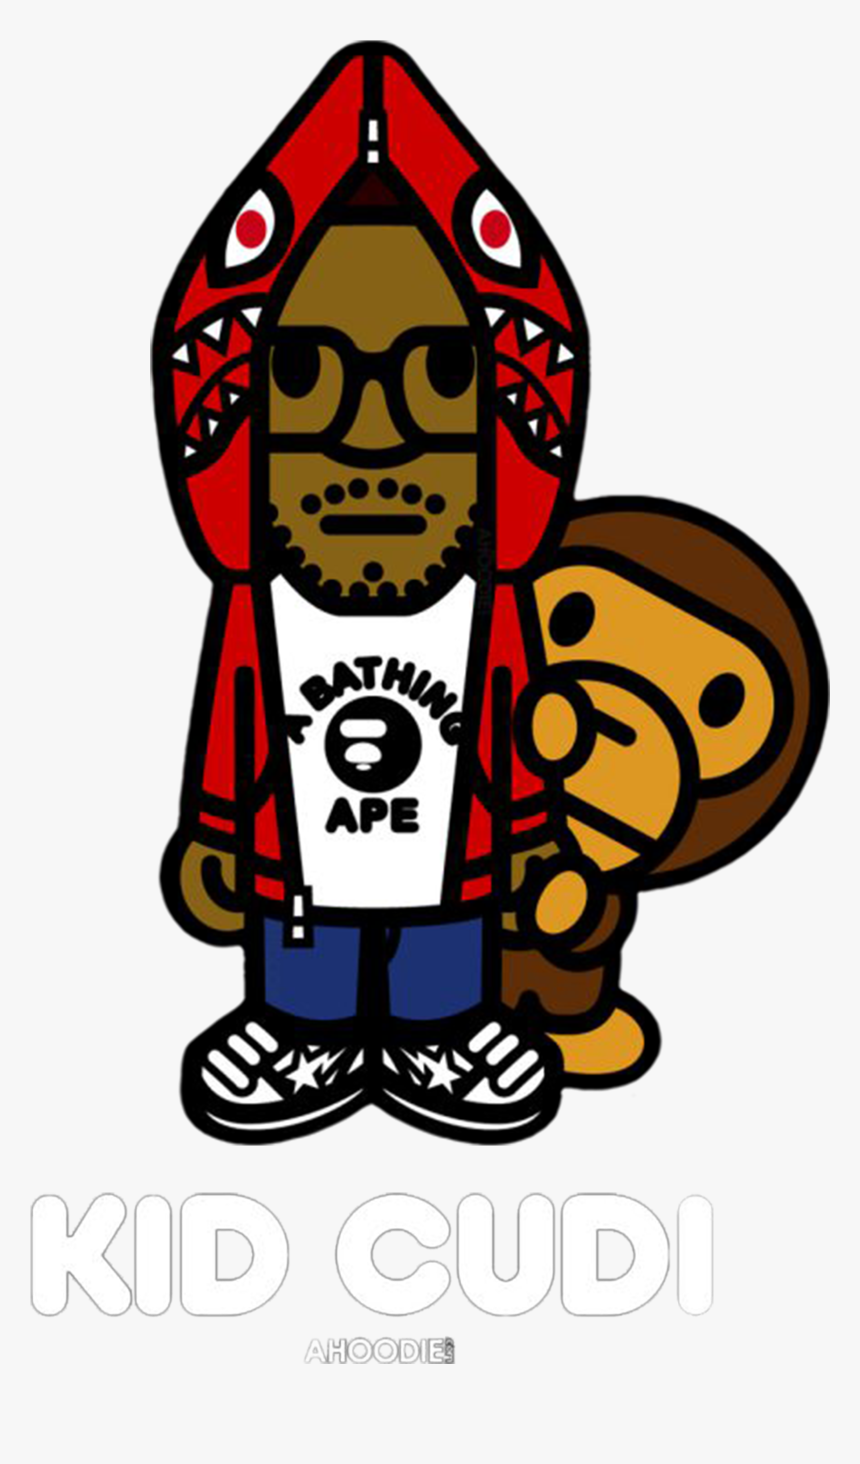 T-shirt A Bathing Ape Art Man On The Moon - Kid Cudi, HD Png Download, Free Download